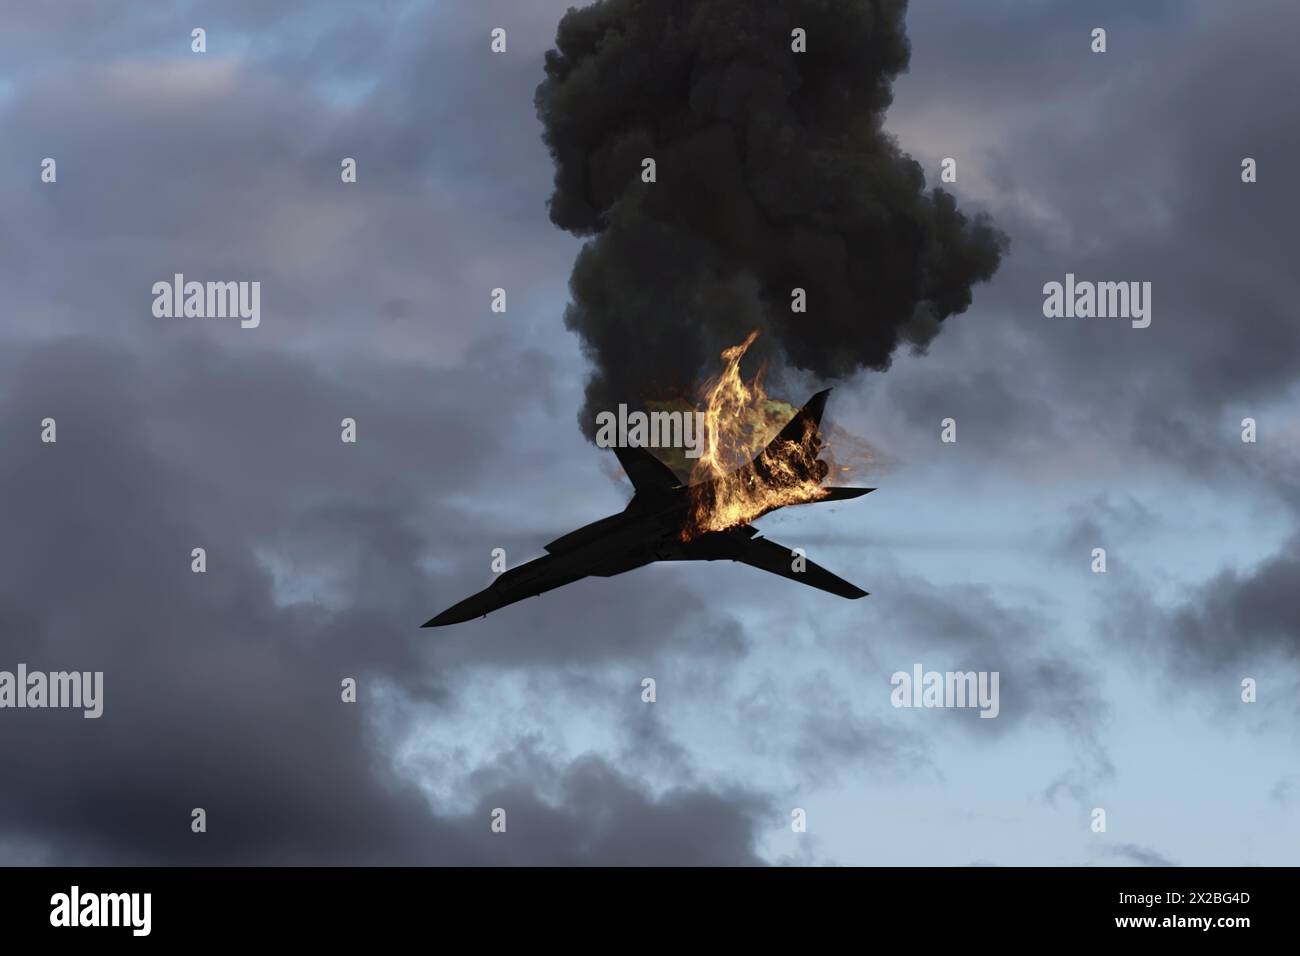 A Russian strategic bomber is hit by a missile and crashes, burning and falling against a background of sky and clouds. Concept: war in Ukraine. Stock Photo